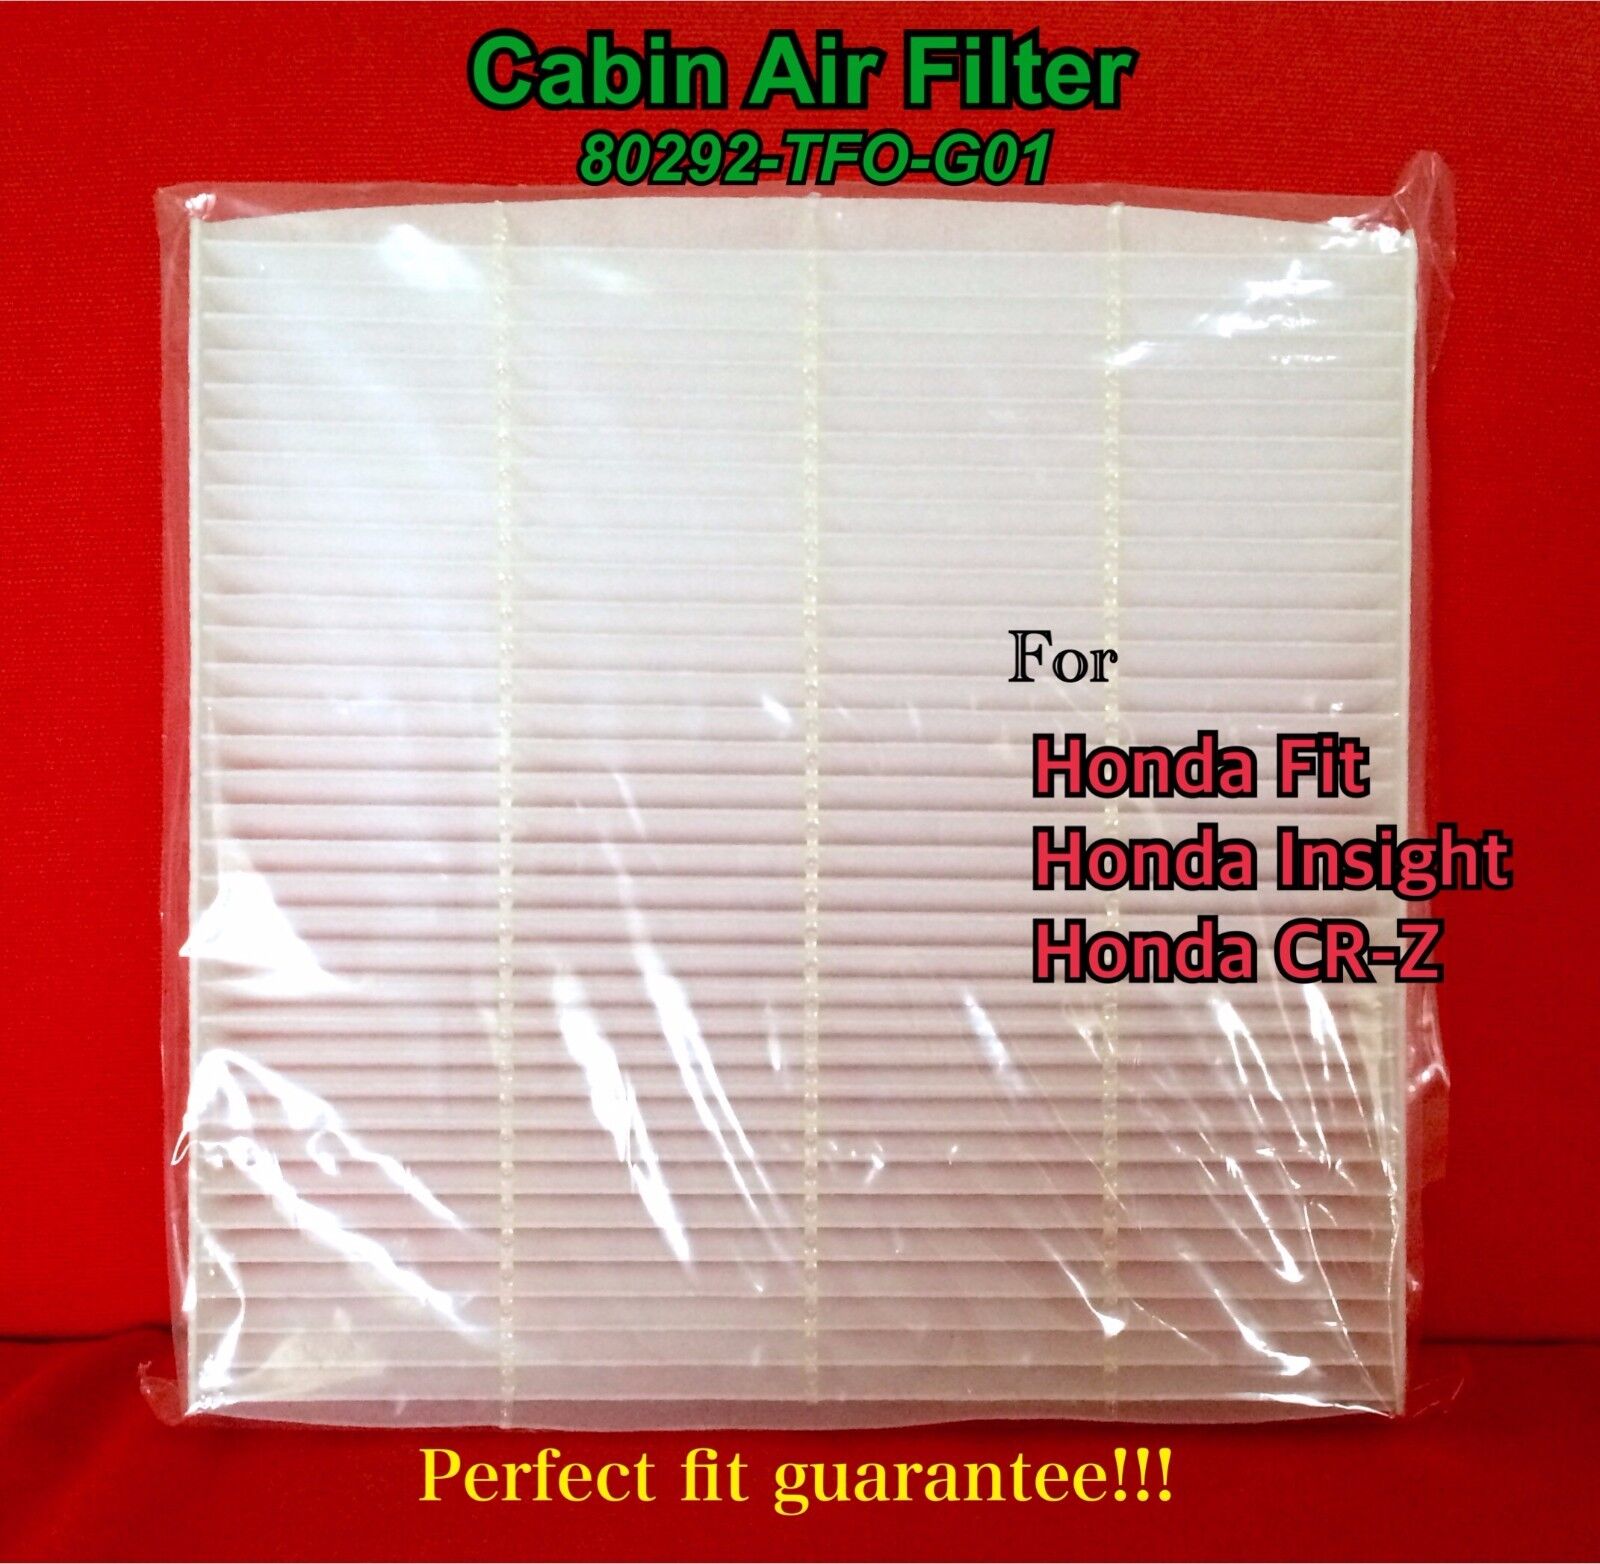 CABIN AIR FILTER For HONDA Fit Insight HR-V CR-V Civic Clarity Odyssey RDX TLX